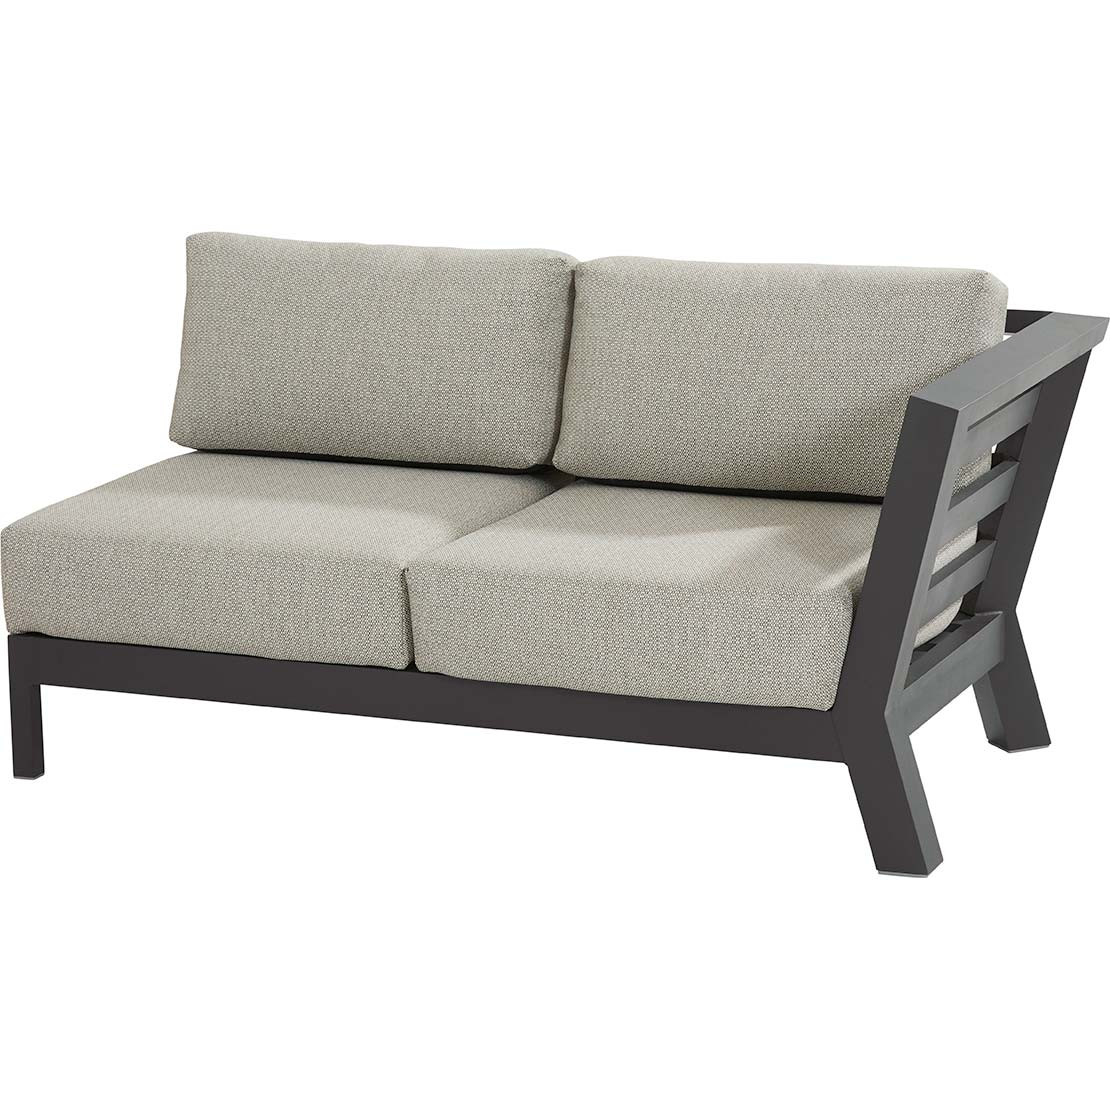 Meteoro modular 2 seater bench L arm with 4 cushions Anthracite